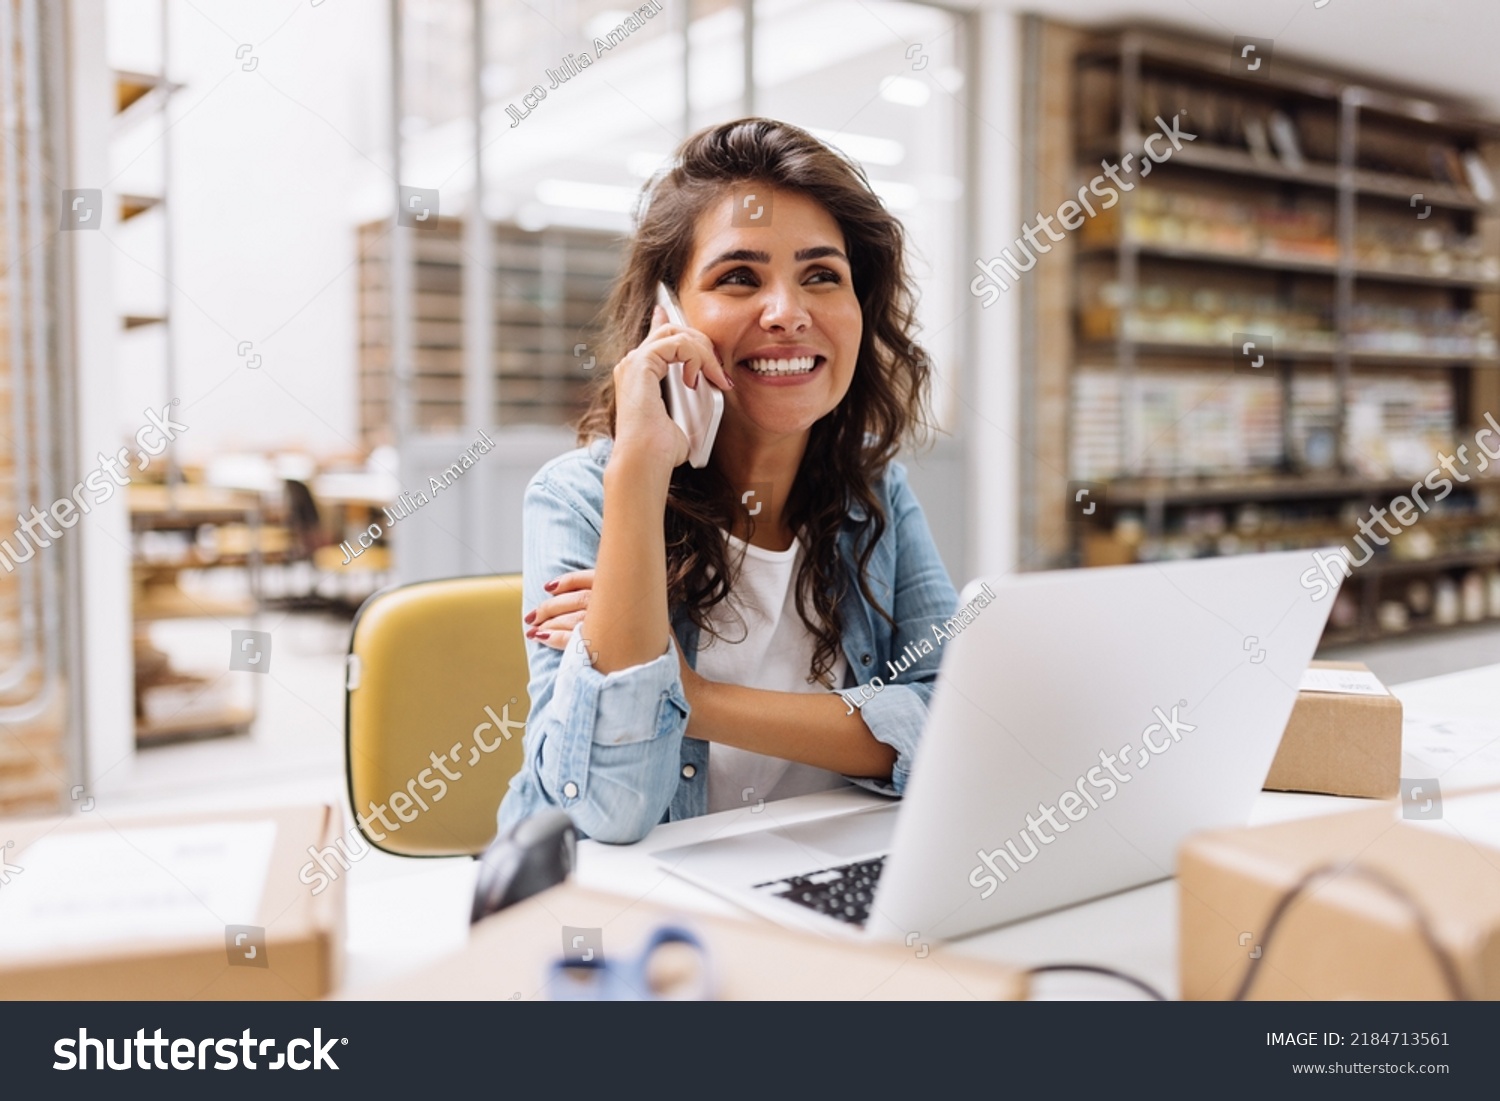 Cheerful businesswoman speaking on the phone while working in a warehouse. Happy online store owner making plans for product shipping. Female entrepreneur running an e-commerce small business. #2184713561